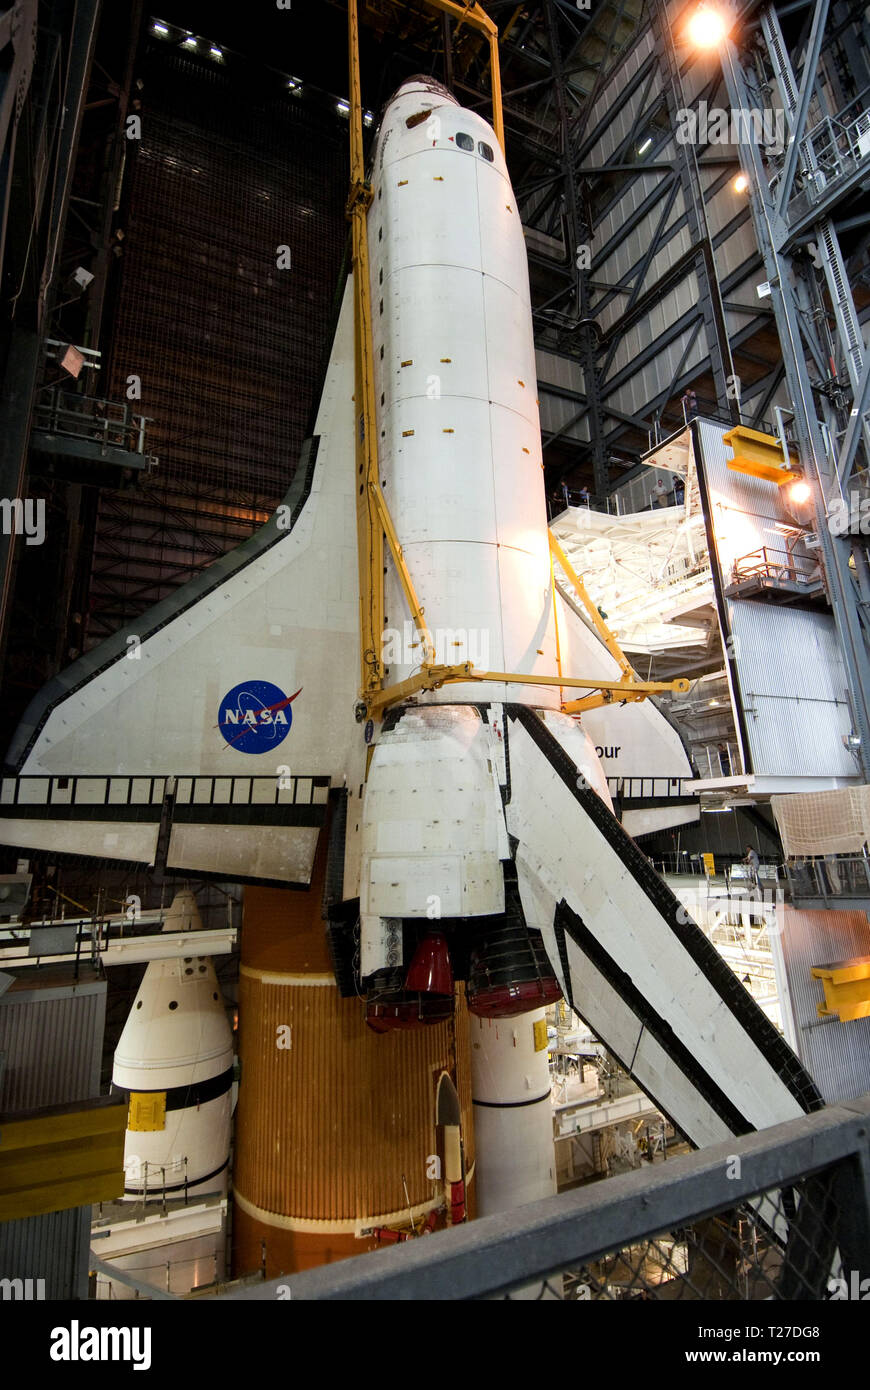 CAPE CANAVERAL, Fla. -- In the Vehicle Assembly Building at NASA's Kennedy Space Center in Florida, shuttle Endeavour is lowered into place where it will be attached to its external fuel tank and solid rocket boosters, already positioned on the mobile launcher platform. Stock Photo